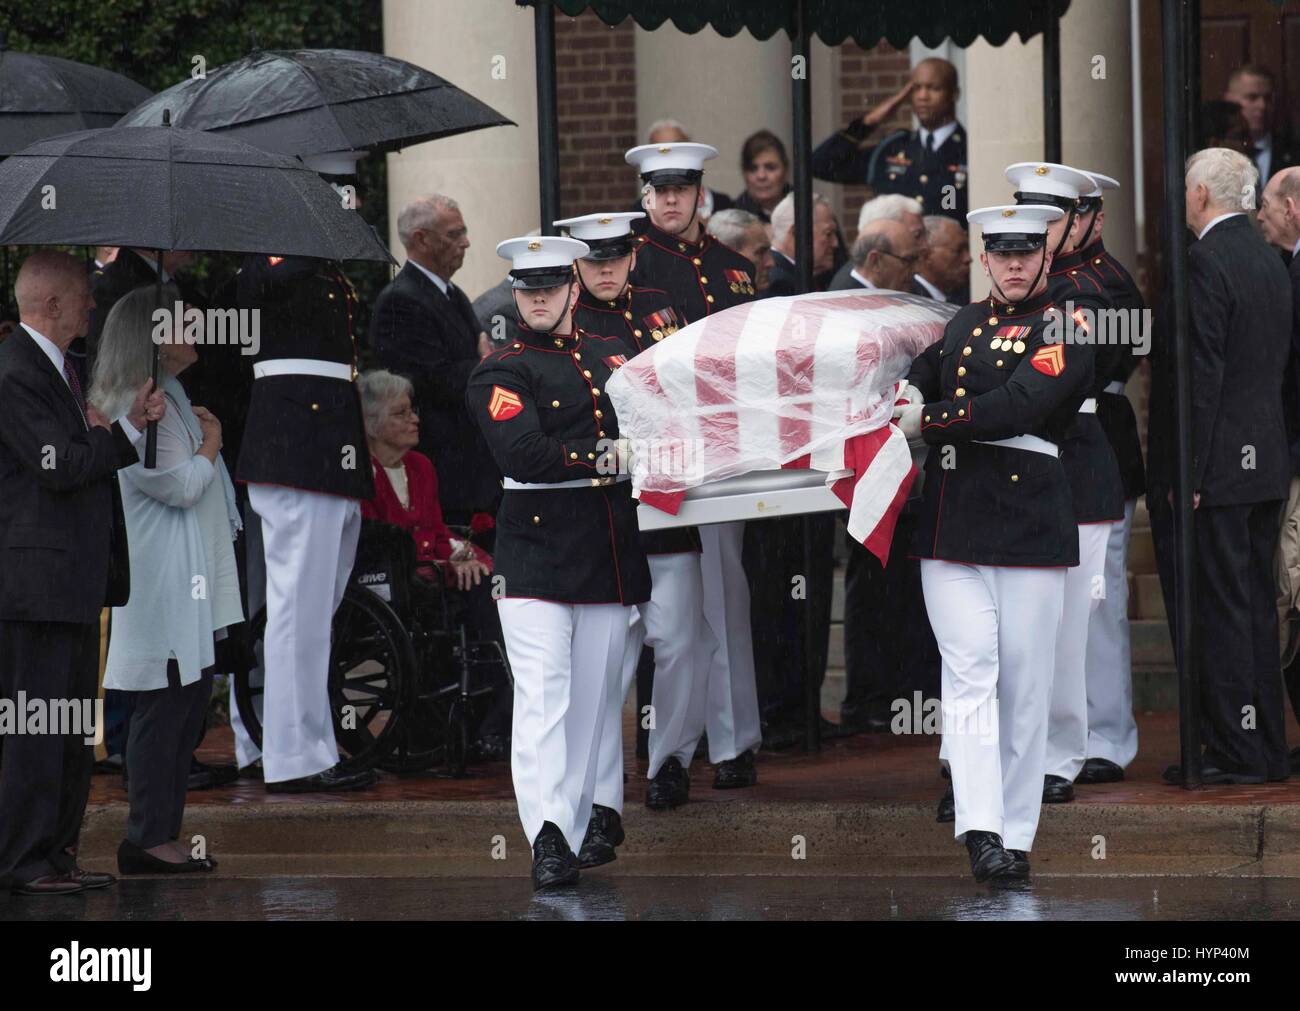 Arlington, Virginia, USA. 6th Apr, 2017. Marines with Marine Barracks Washington load the remains of John Glenn onto a horse drawn hearse outside the Old Post Chapel, Ft. Meyer April 6, 2017 in Arlington, Virginia. Glenn, the first American astronaut to orbit the Earth and later a United States senator, died at the age of 95 on December 8, 2016. Credit: Planetpix/Alamy Live News Stock Photo